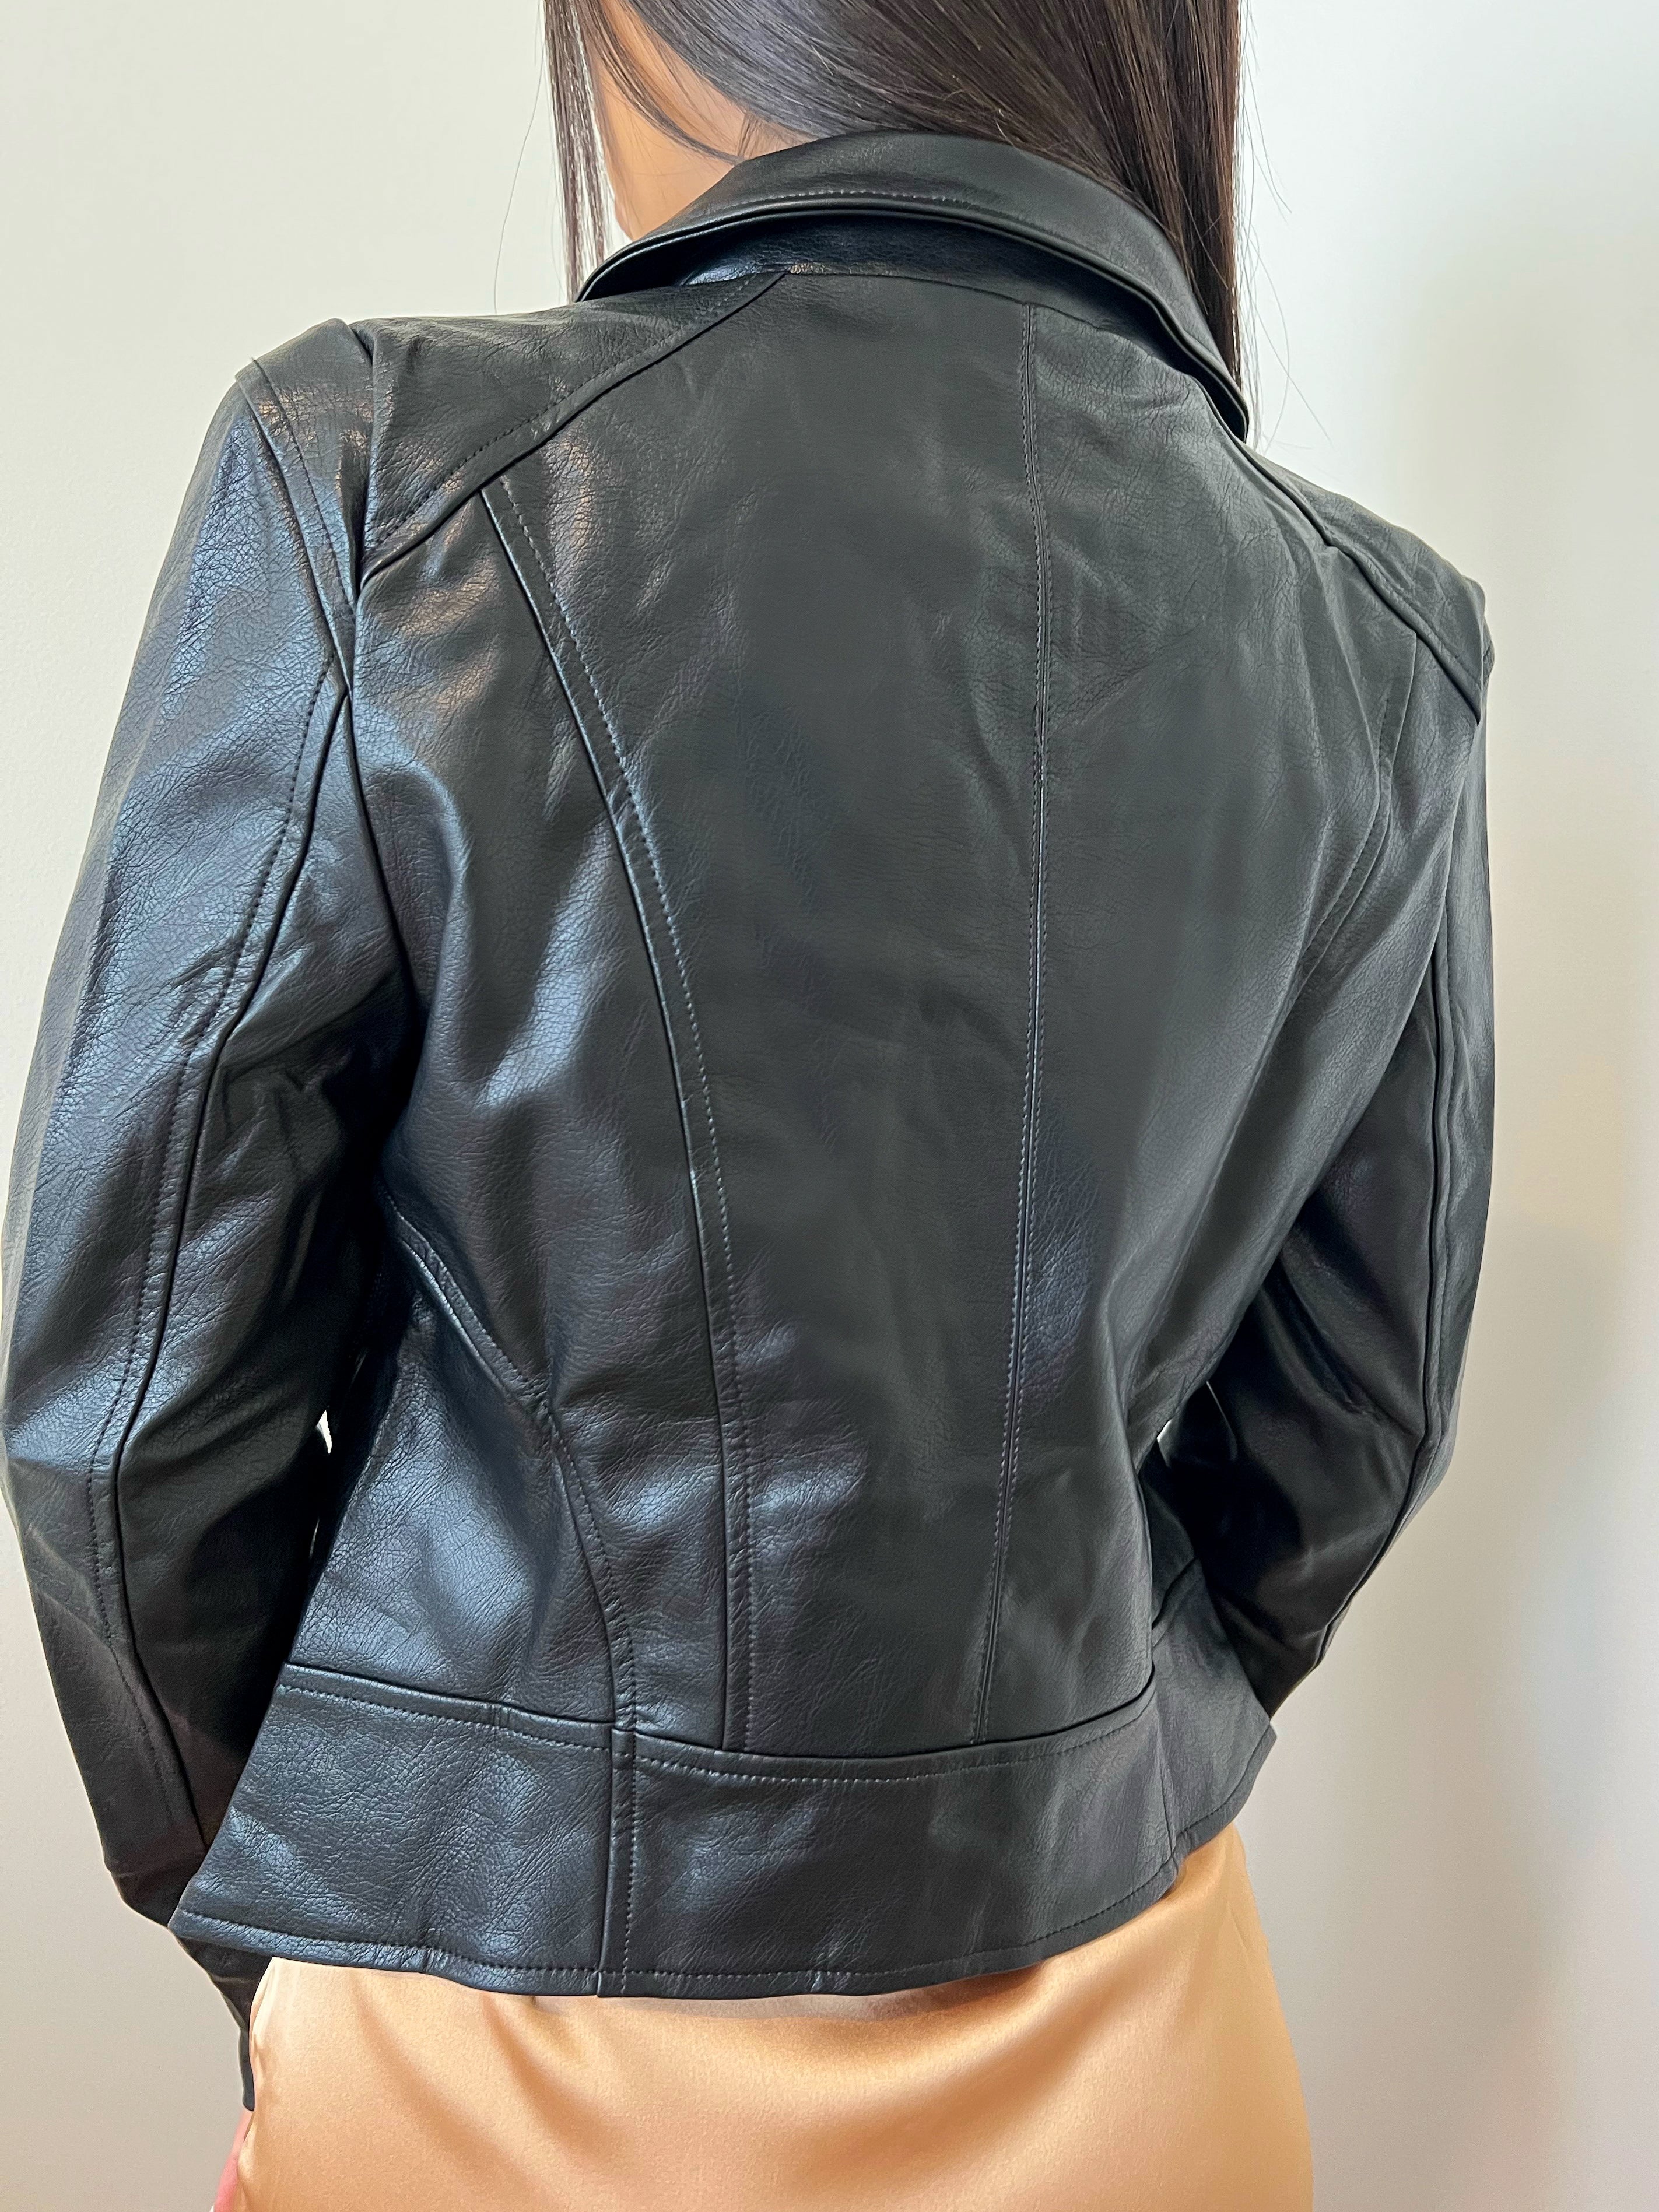 Women's Motorcycle Jacket in Black, Size Small, Leather by Quince